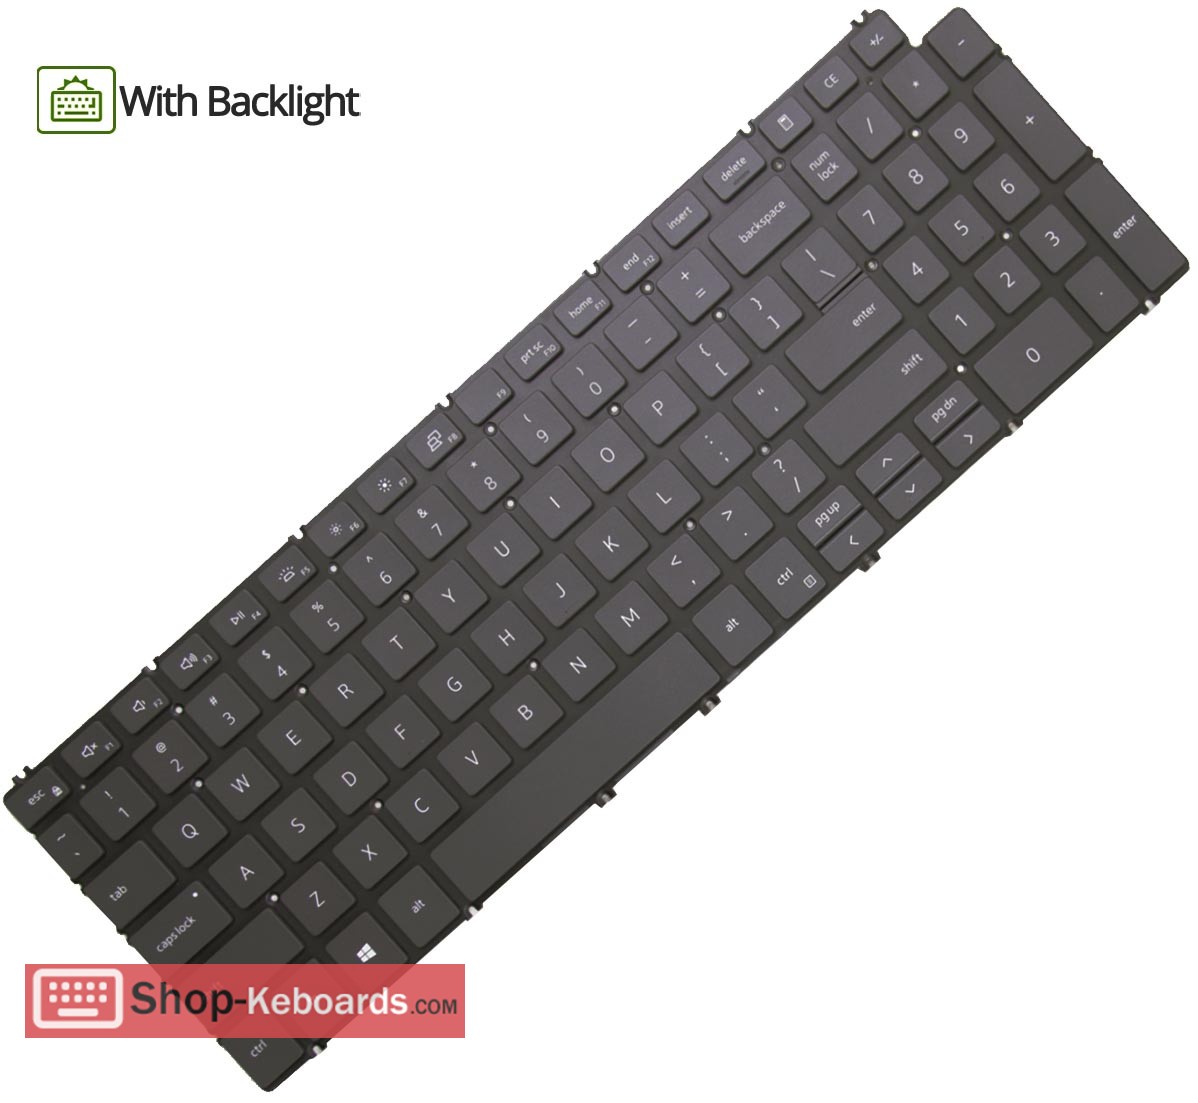 Dell INSPIRON 15 5510 Keyboard replacement